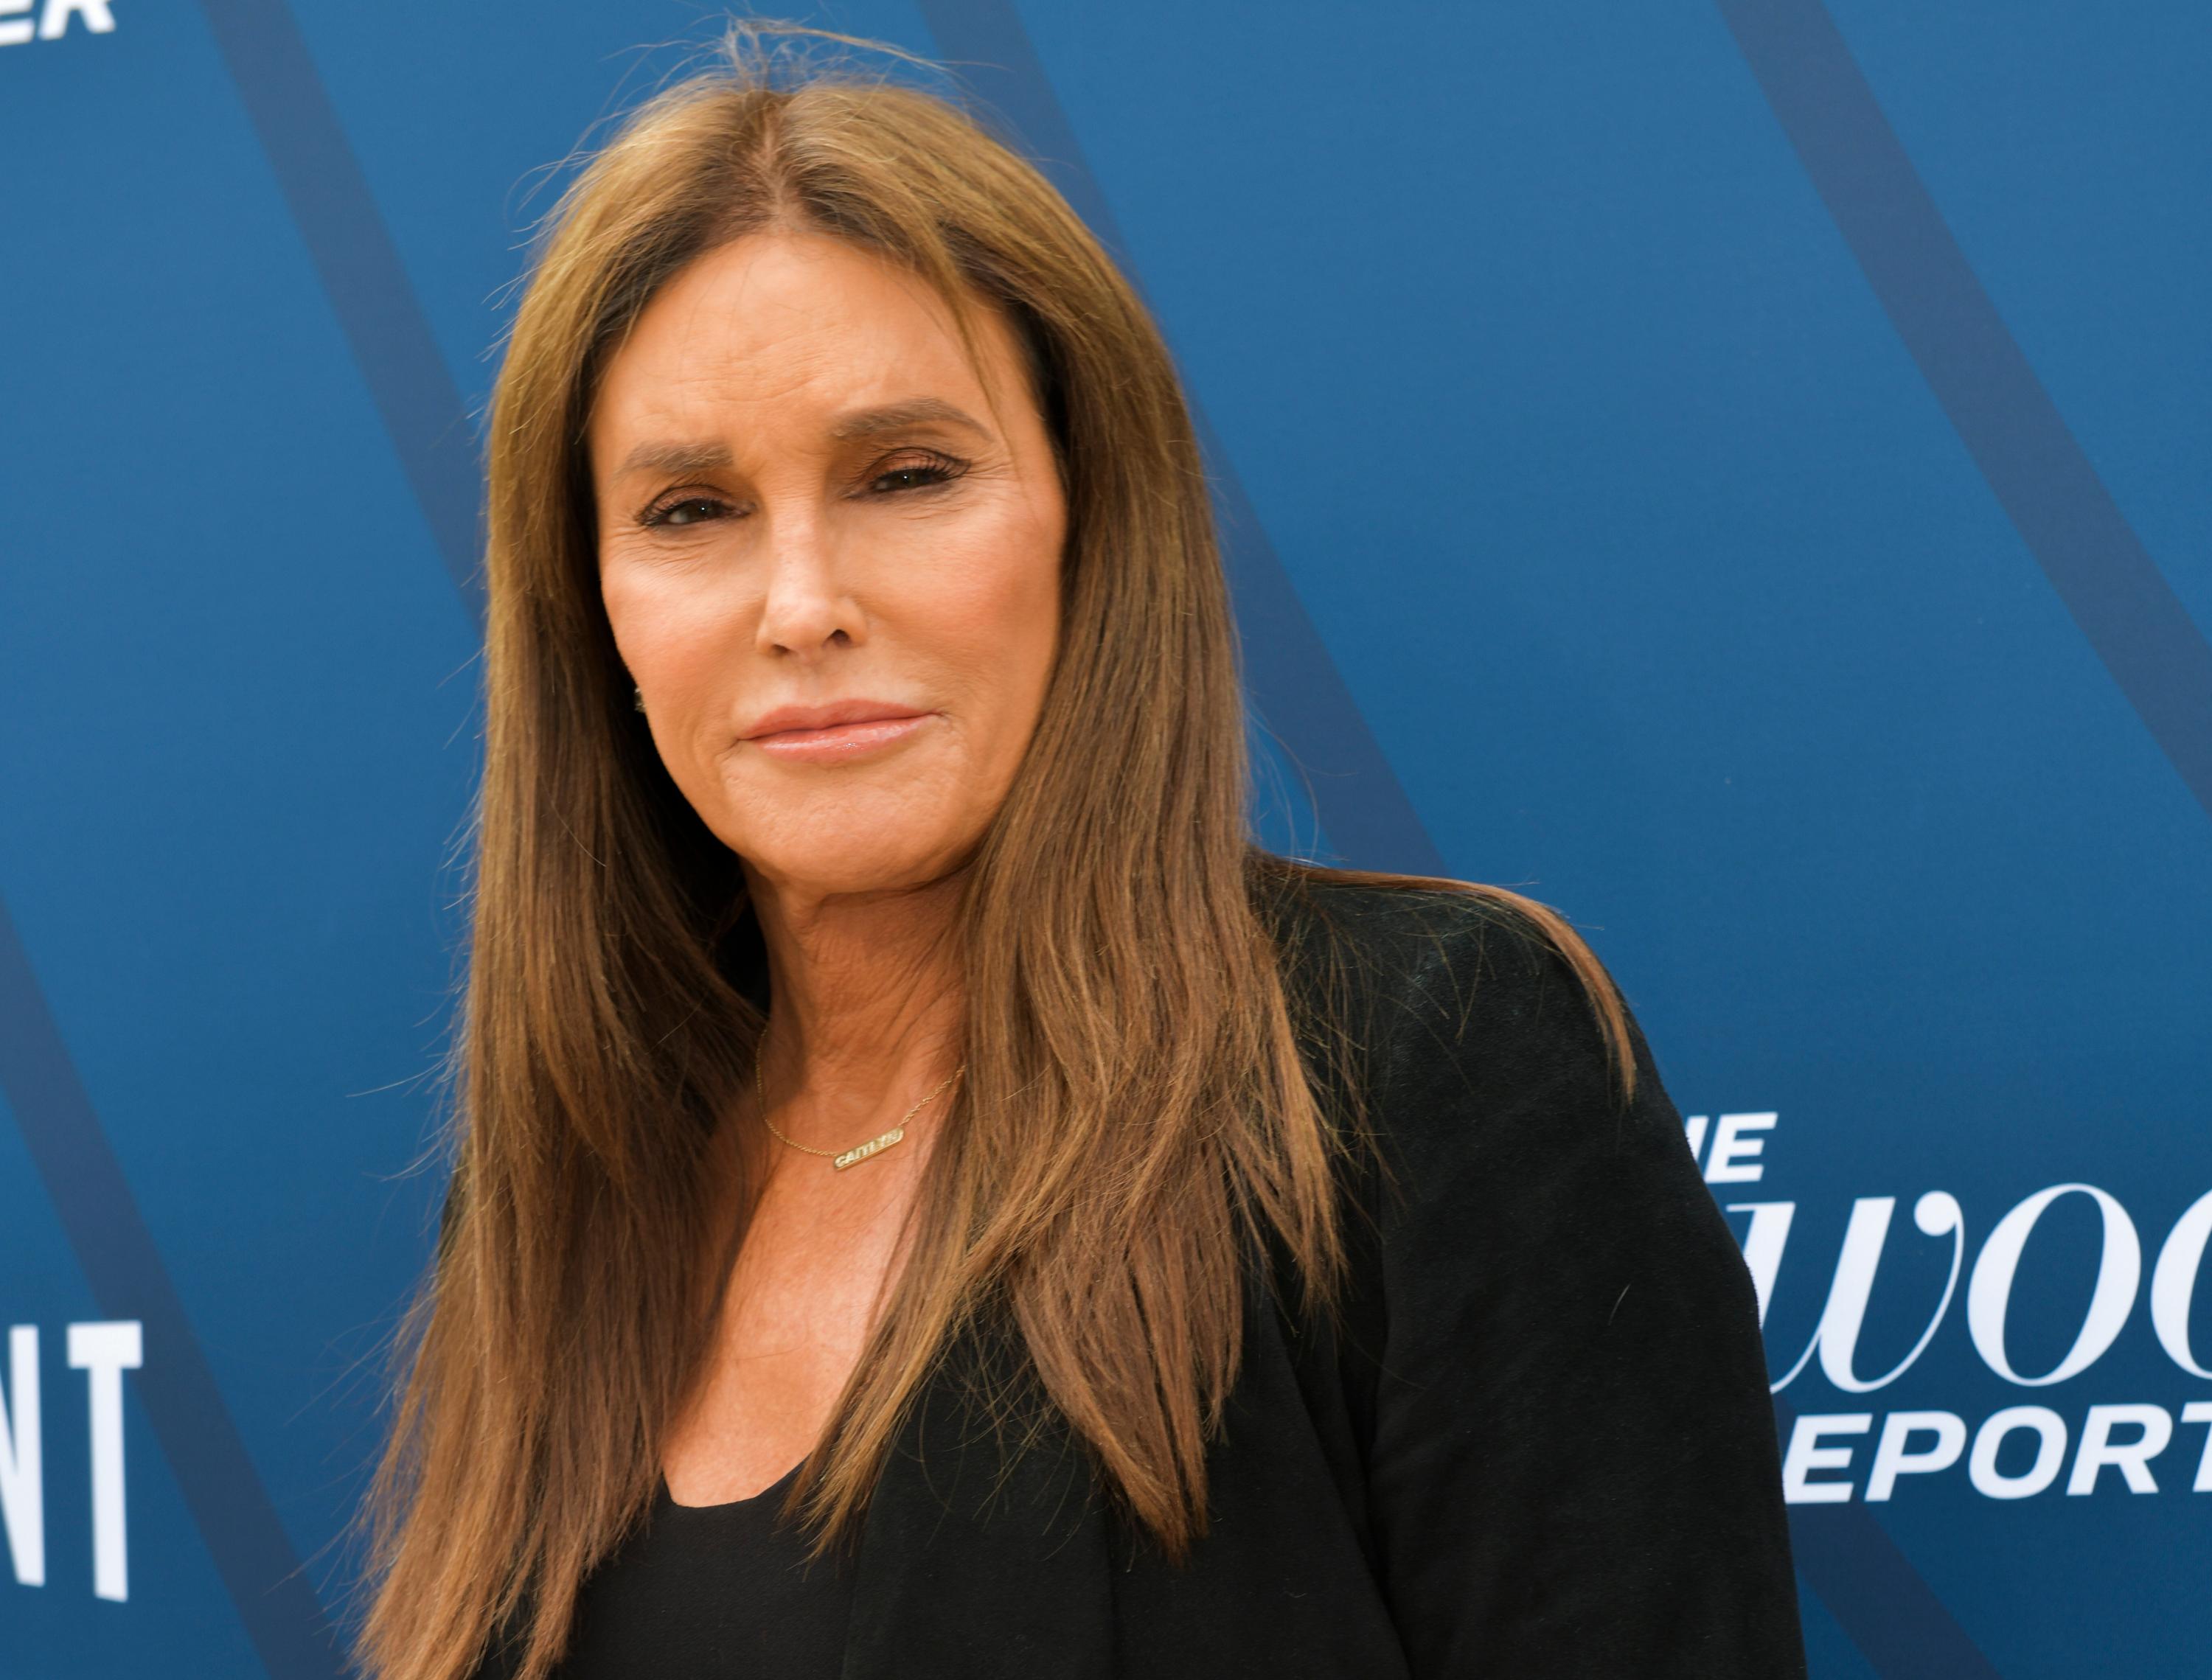 Caitlyn Jenner Wants A Role On ‘RHOBH,’ Says She’s A Fan Of Lisa Rinna